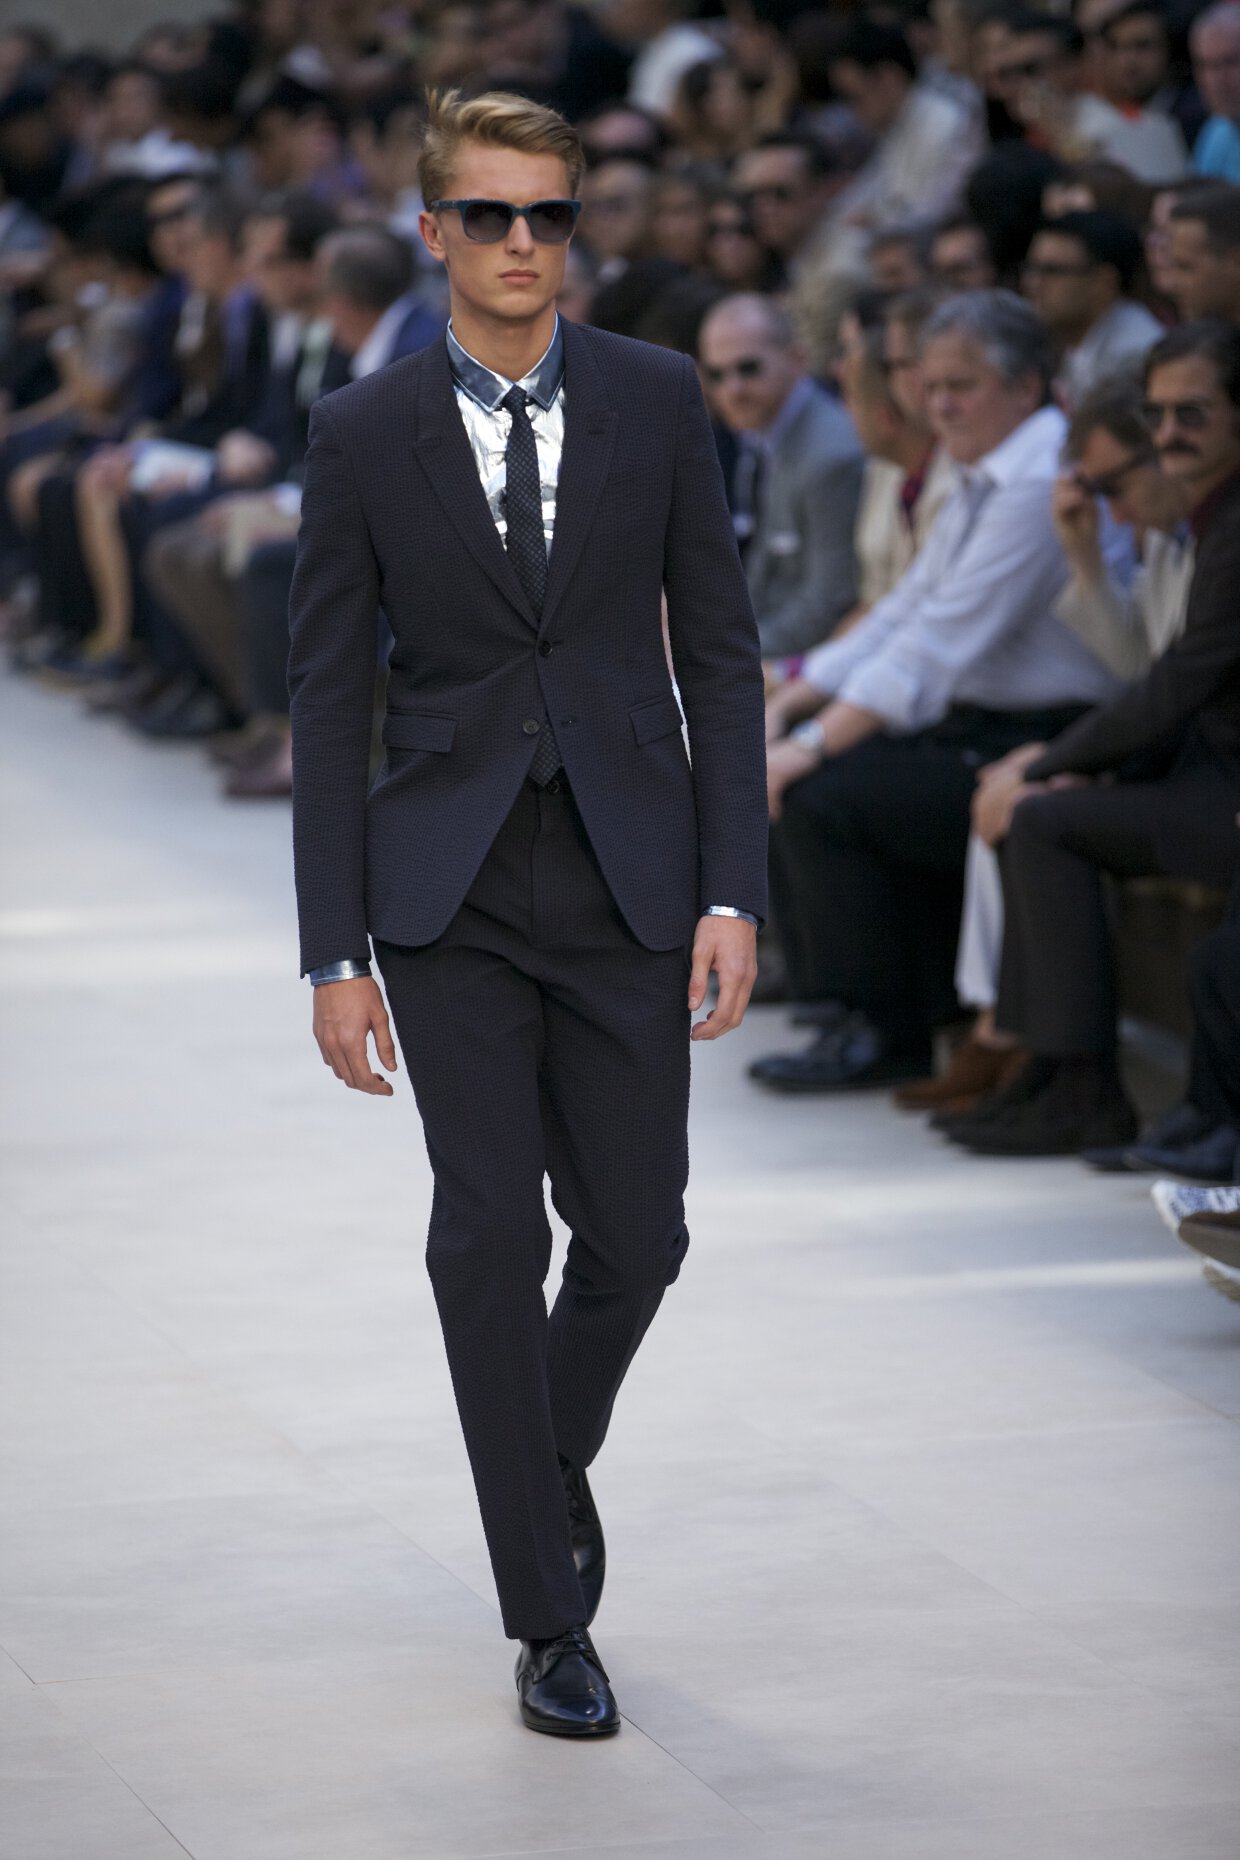 BURBERRY PRORSUM SPRING SUMMER 2013 MEN'S COLLECTION | The Skinny Beep